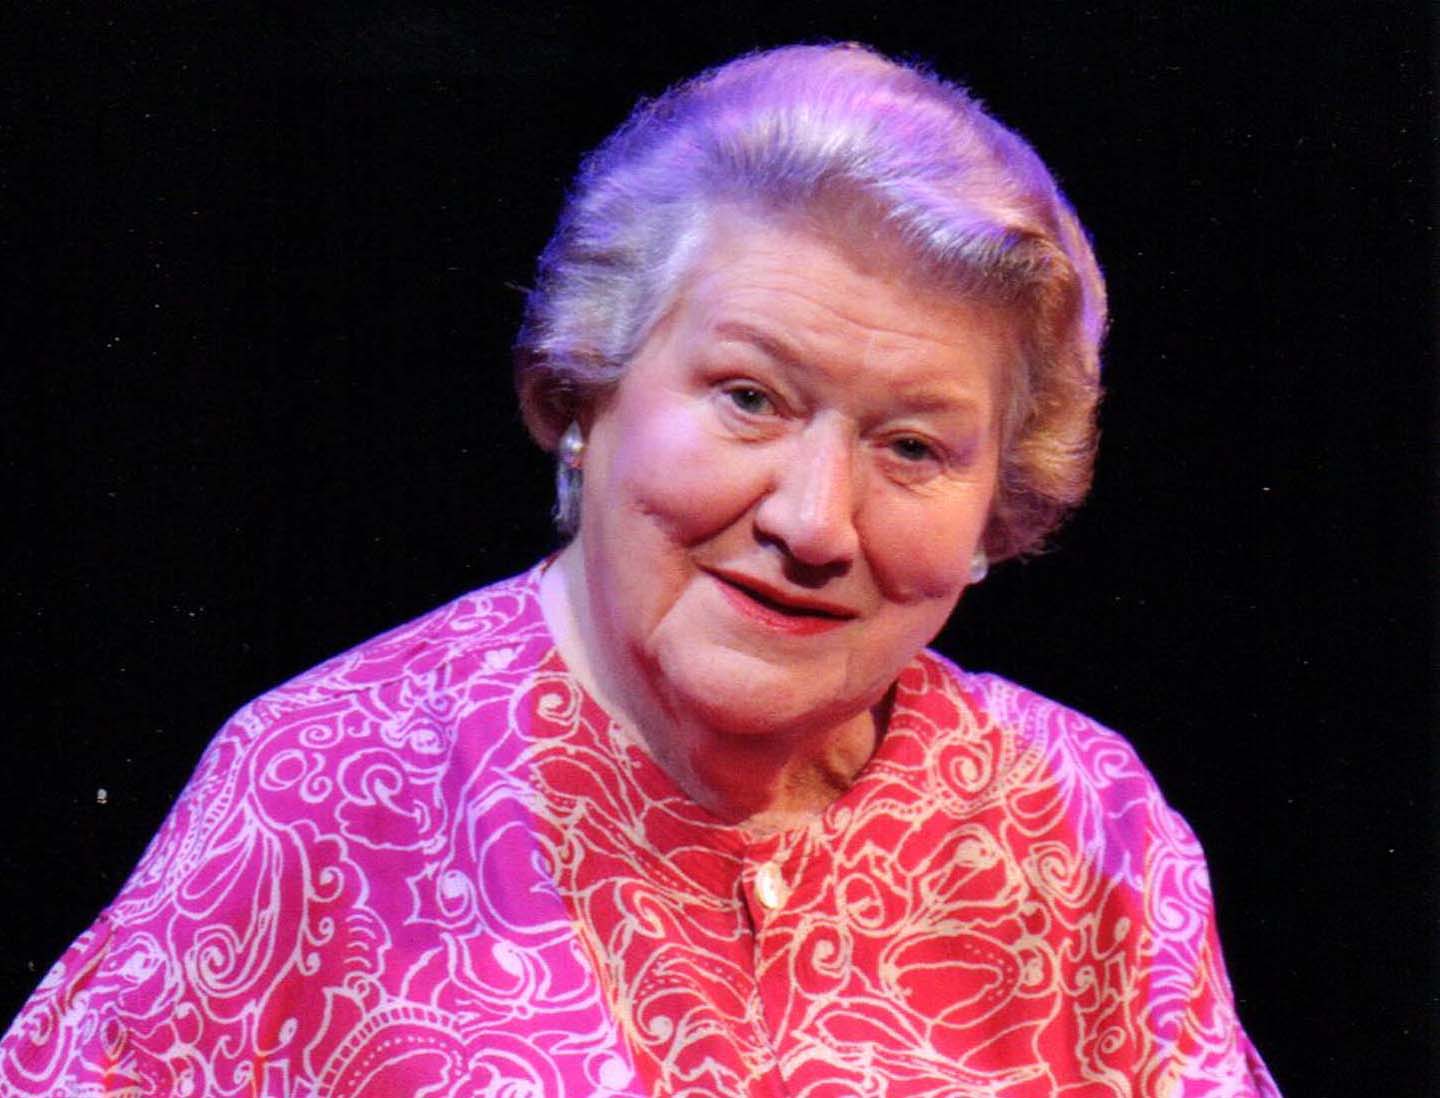 Dame Patricia Routledge reads Keats' immortal Odes to mark the bicente...